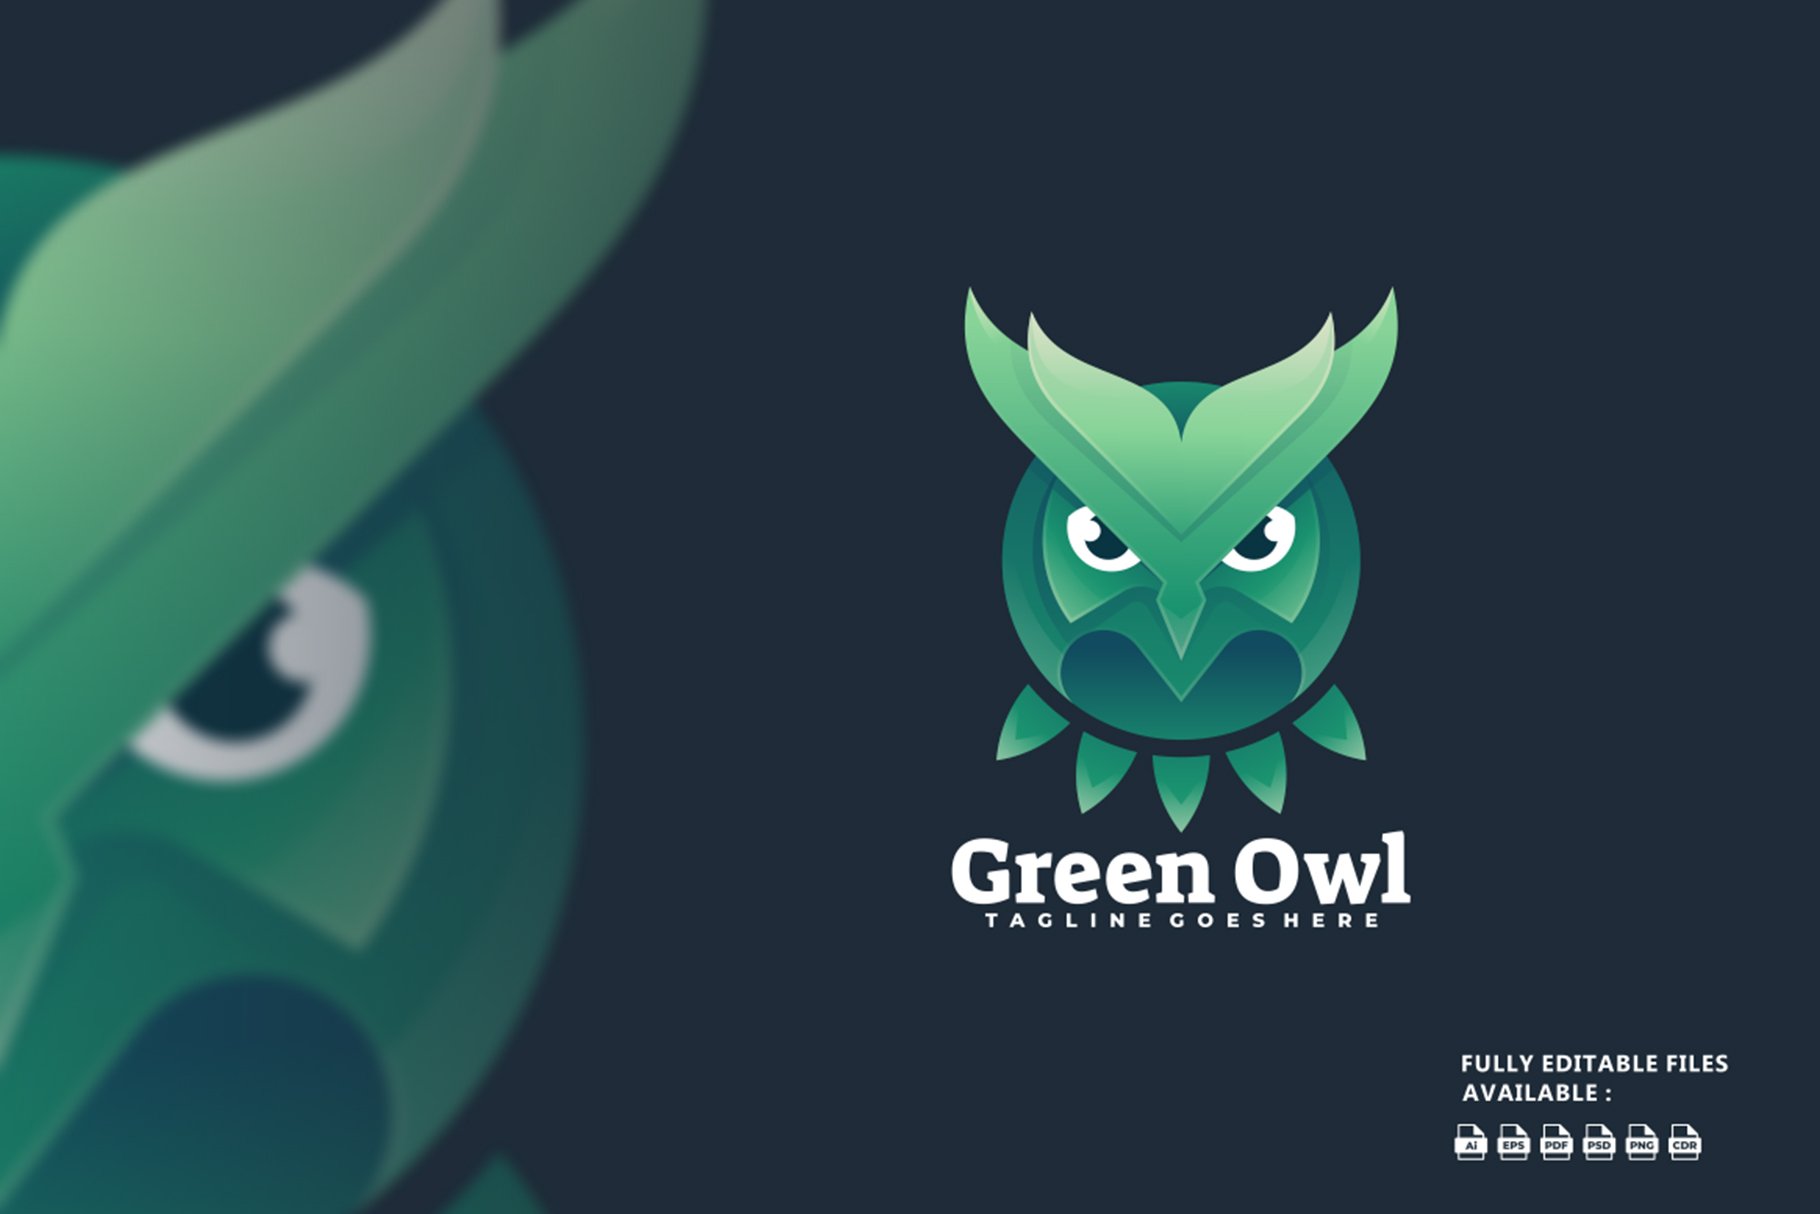 Green Owl Colorful Logo cover image.